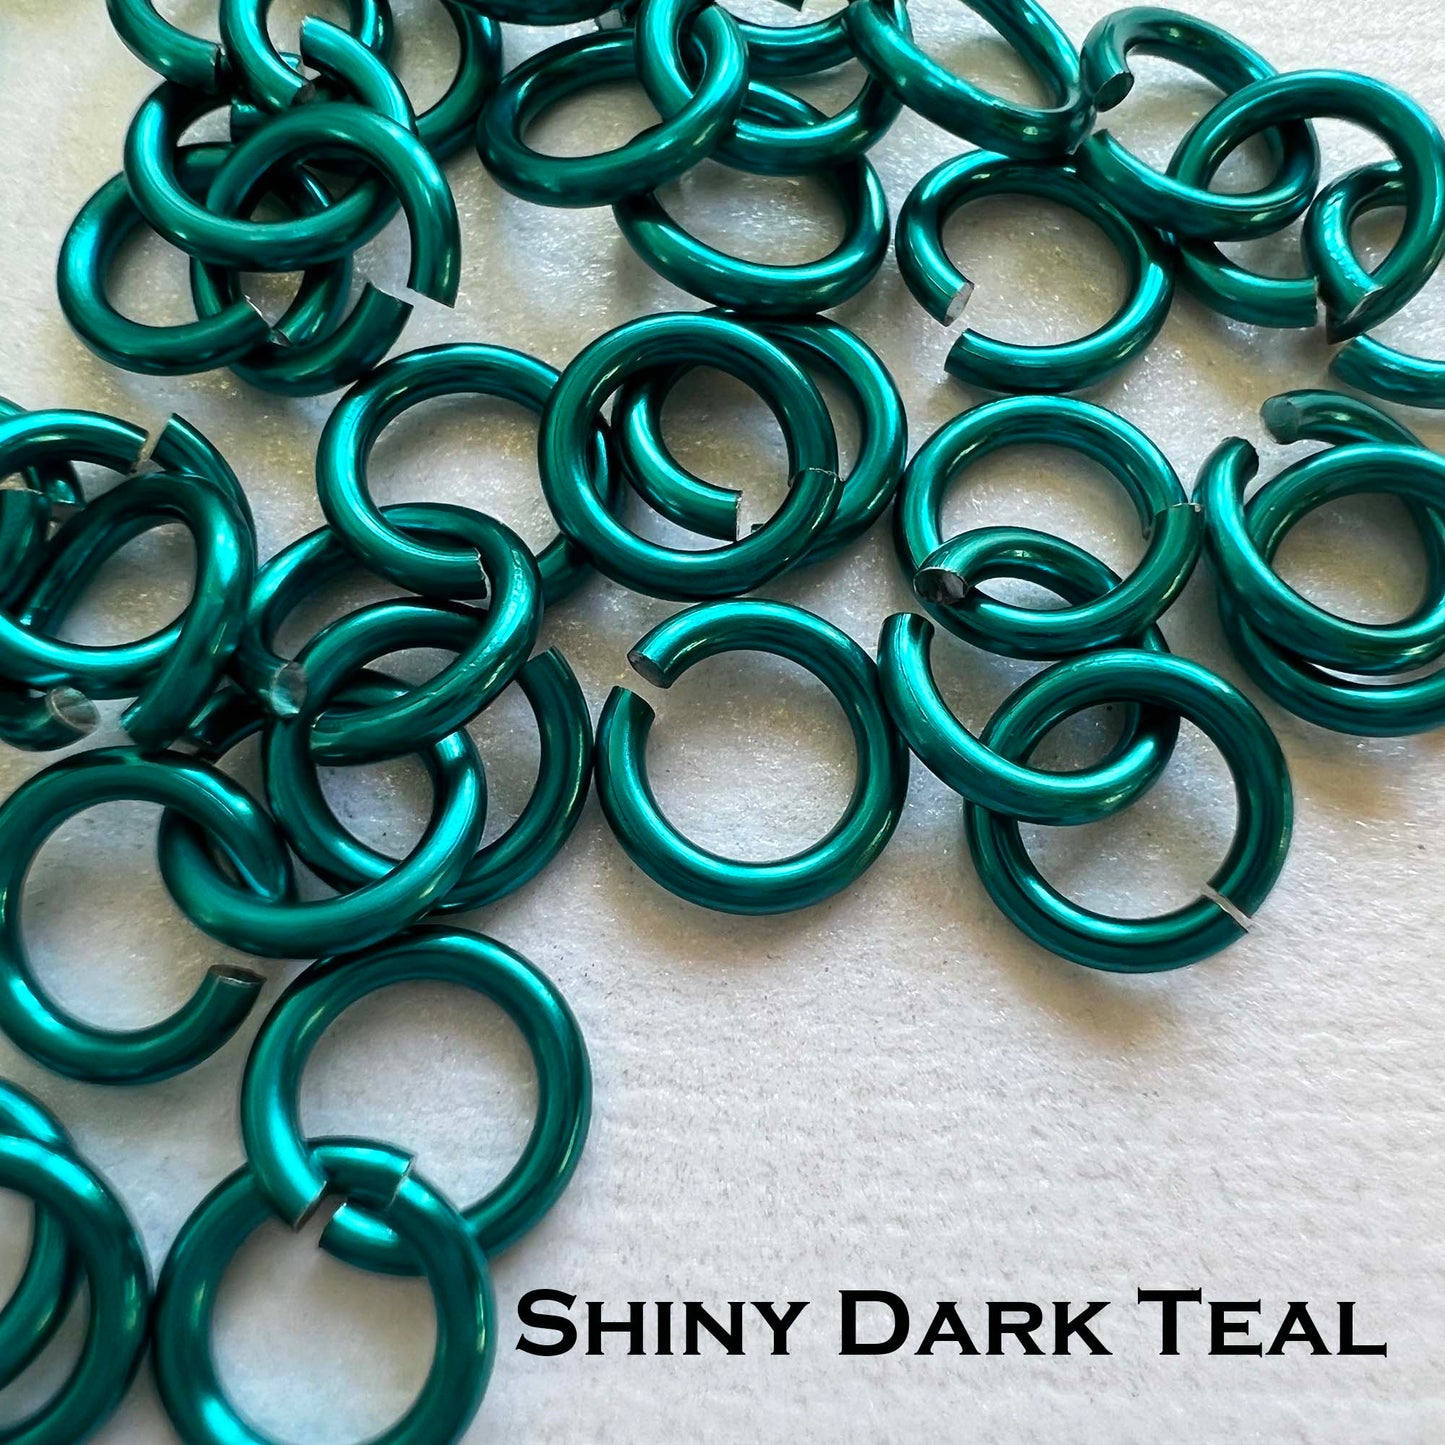 20g 7/64" Jump Rings SHINY (AWG) ID: 2.8mm- choose color & quantity